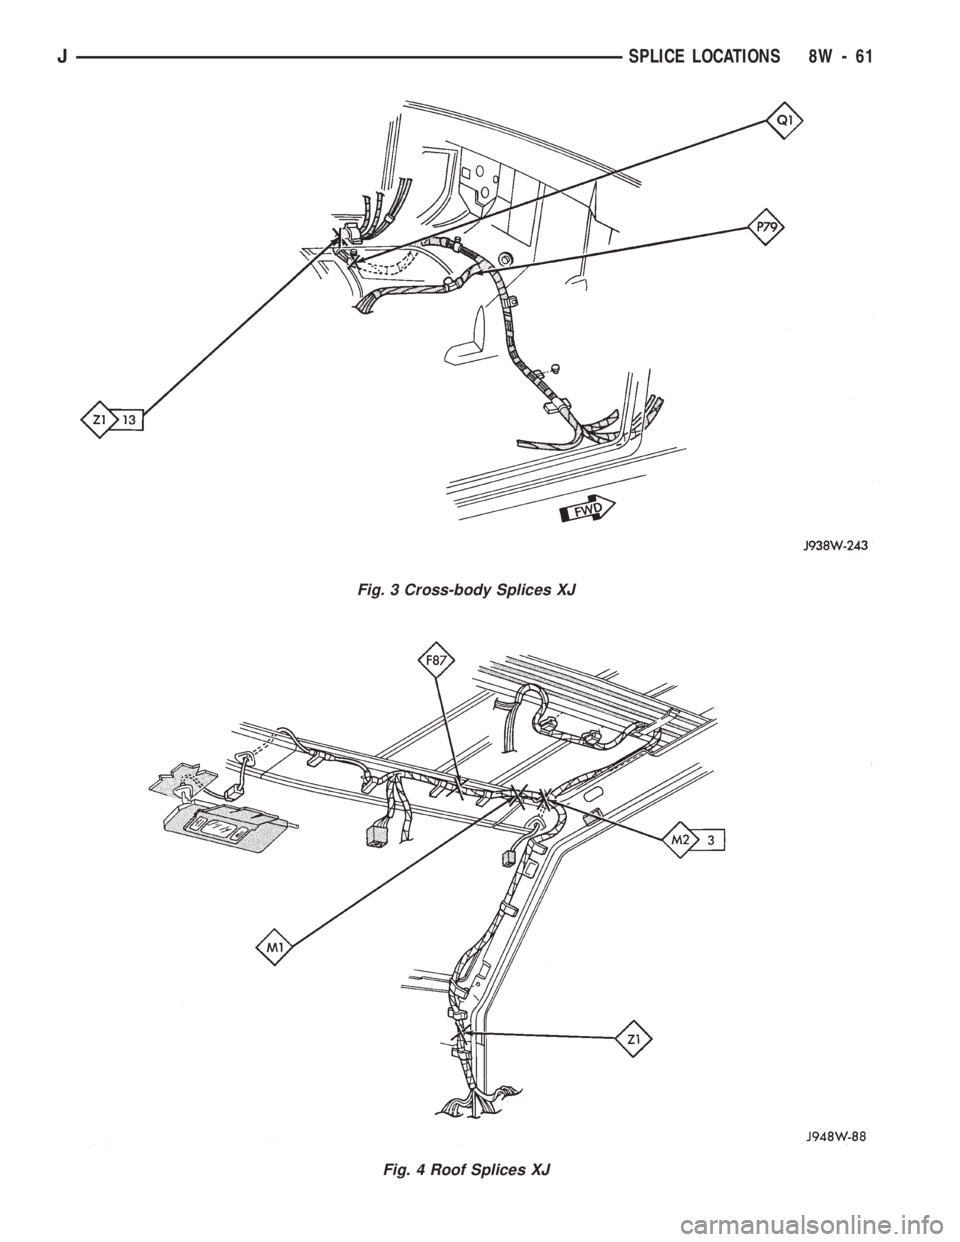 JEEP WRANGLER 1994  Owners Manual Fig. 4 Roof Splices XJ
JSPLICE LOCATIONS 8W - 61 